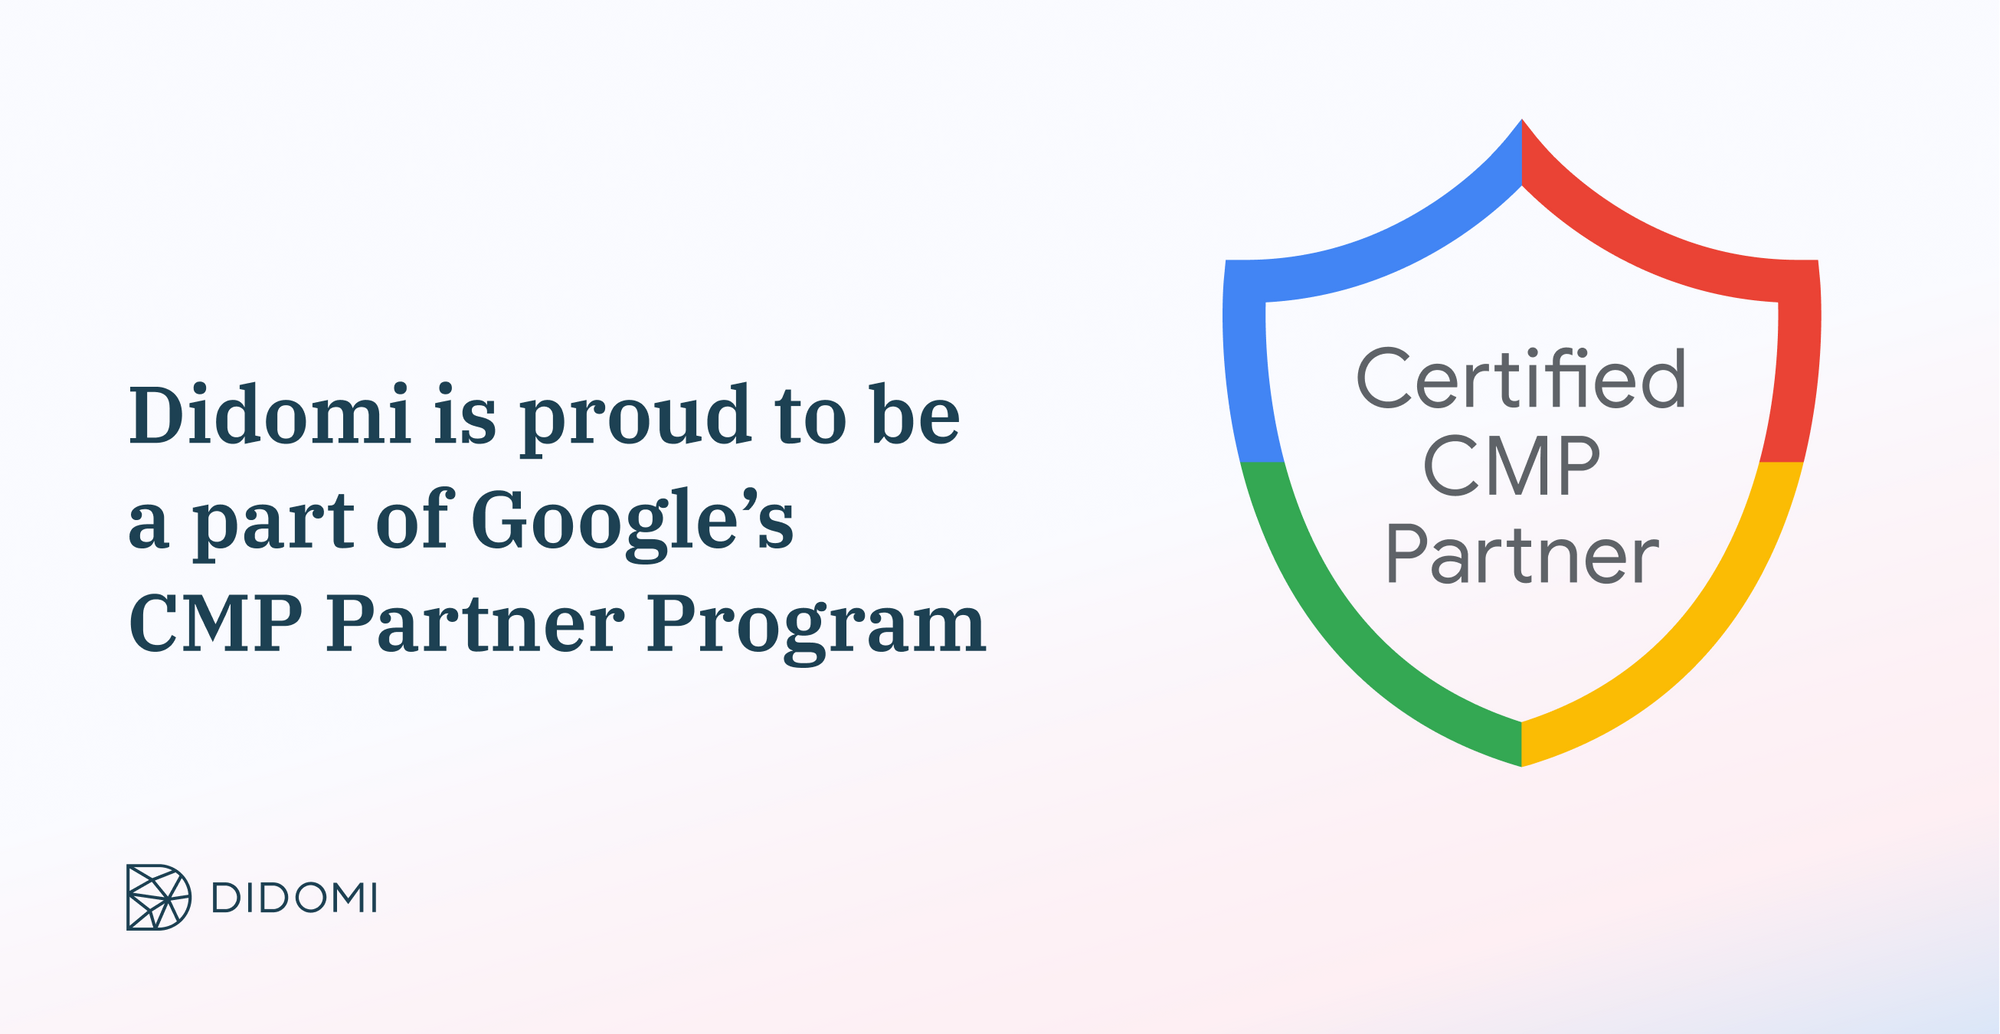 Didomi is proud to be a part of Google’s CMP Partner Program